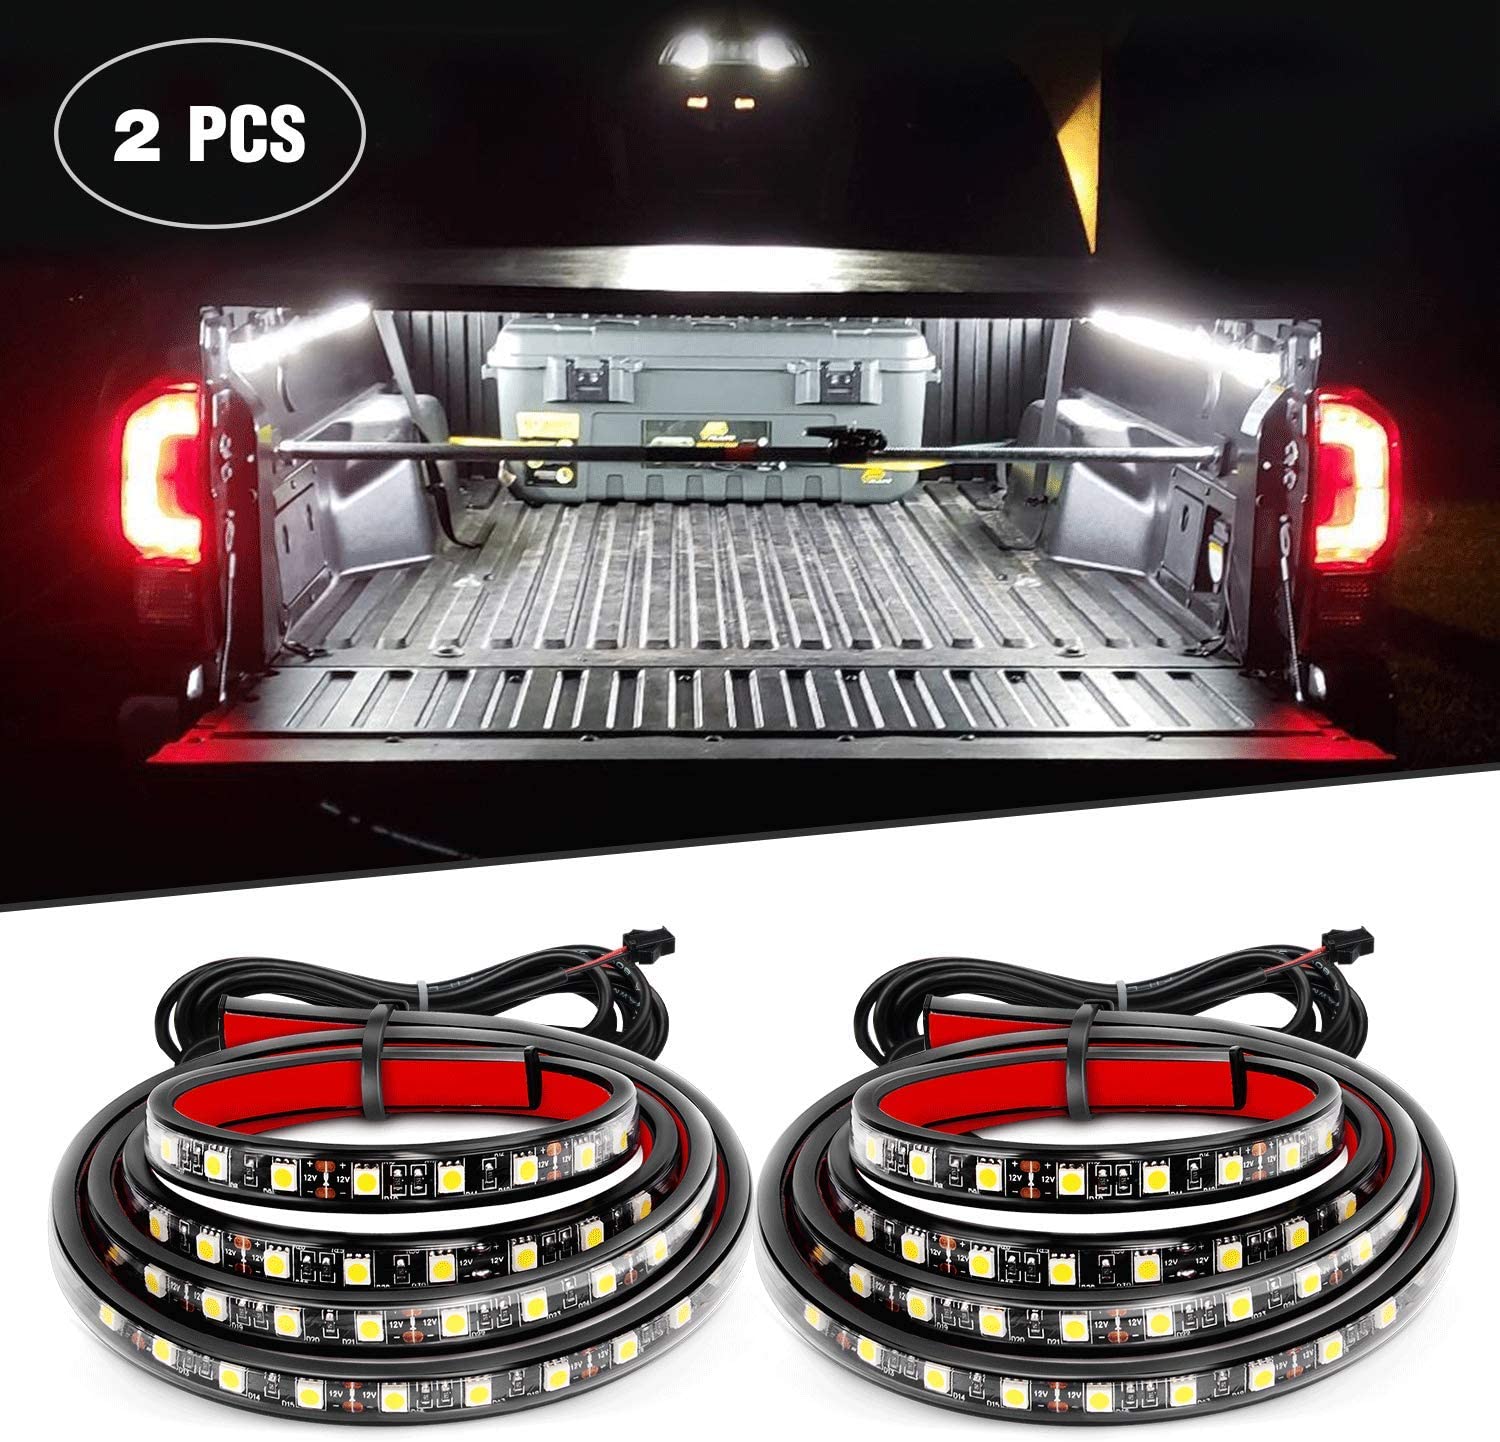 Nilight 2PCS 60'' 180 LEDs Bed Strip Kit with Waterproof On/Off Switch Blade Fuse 2-Way Splitter Extension Cable for Cargo, Pickup Truck, SUV, RV, Boat, 2 Years Warranty